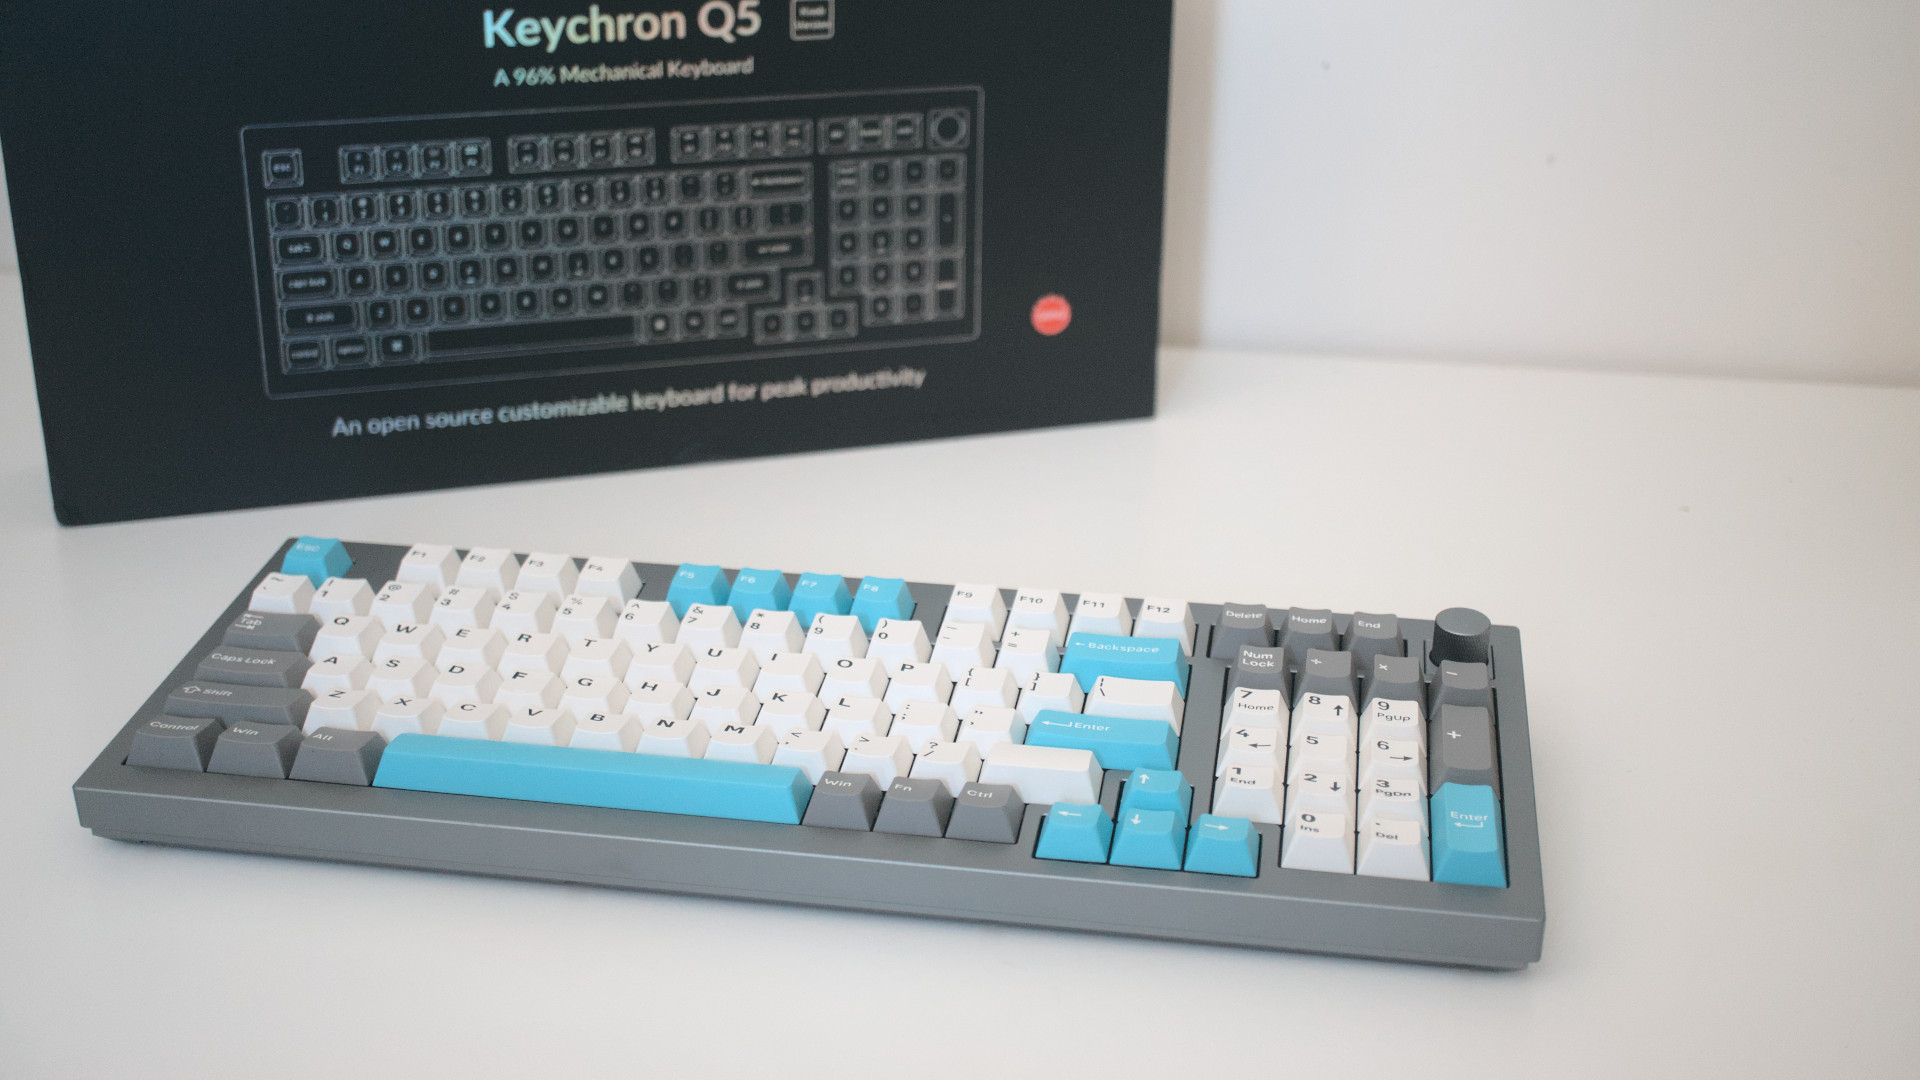 Keychron Q5 review: Easily customize this full-size behemoth